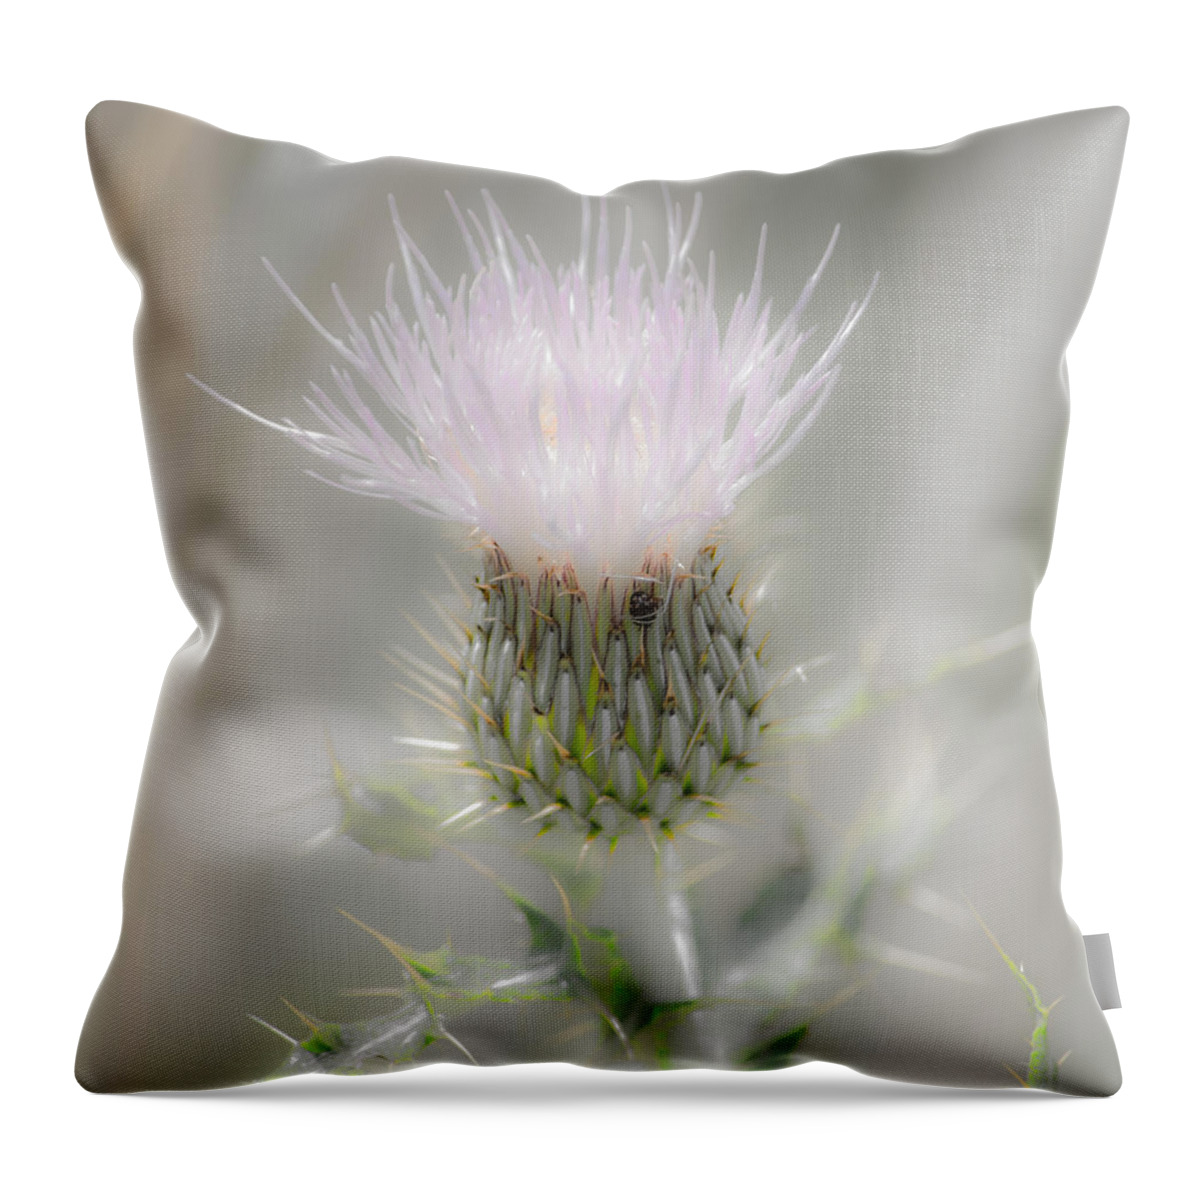 Glimmering Thistle Throw Pillow featuring the photograph Glimmering Thistle by Debra Martz